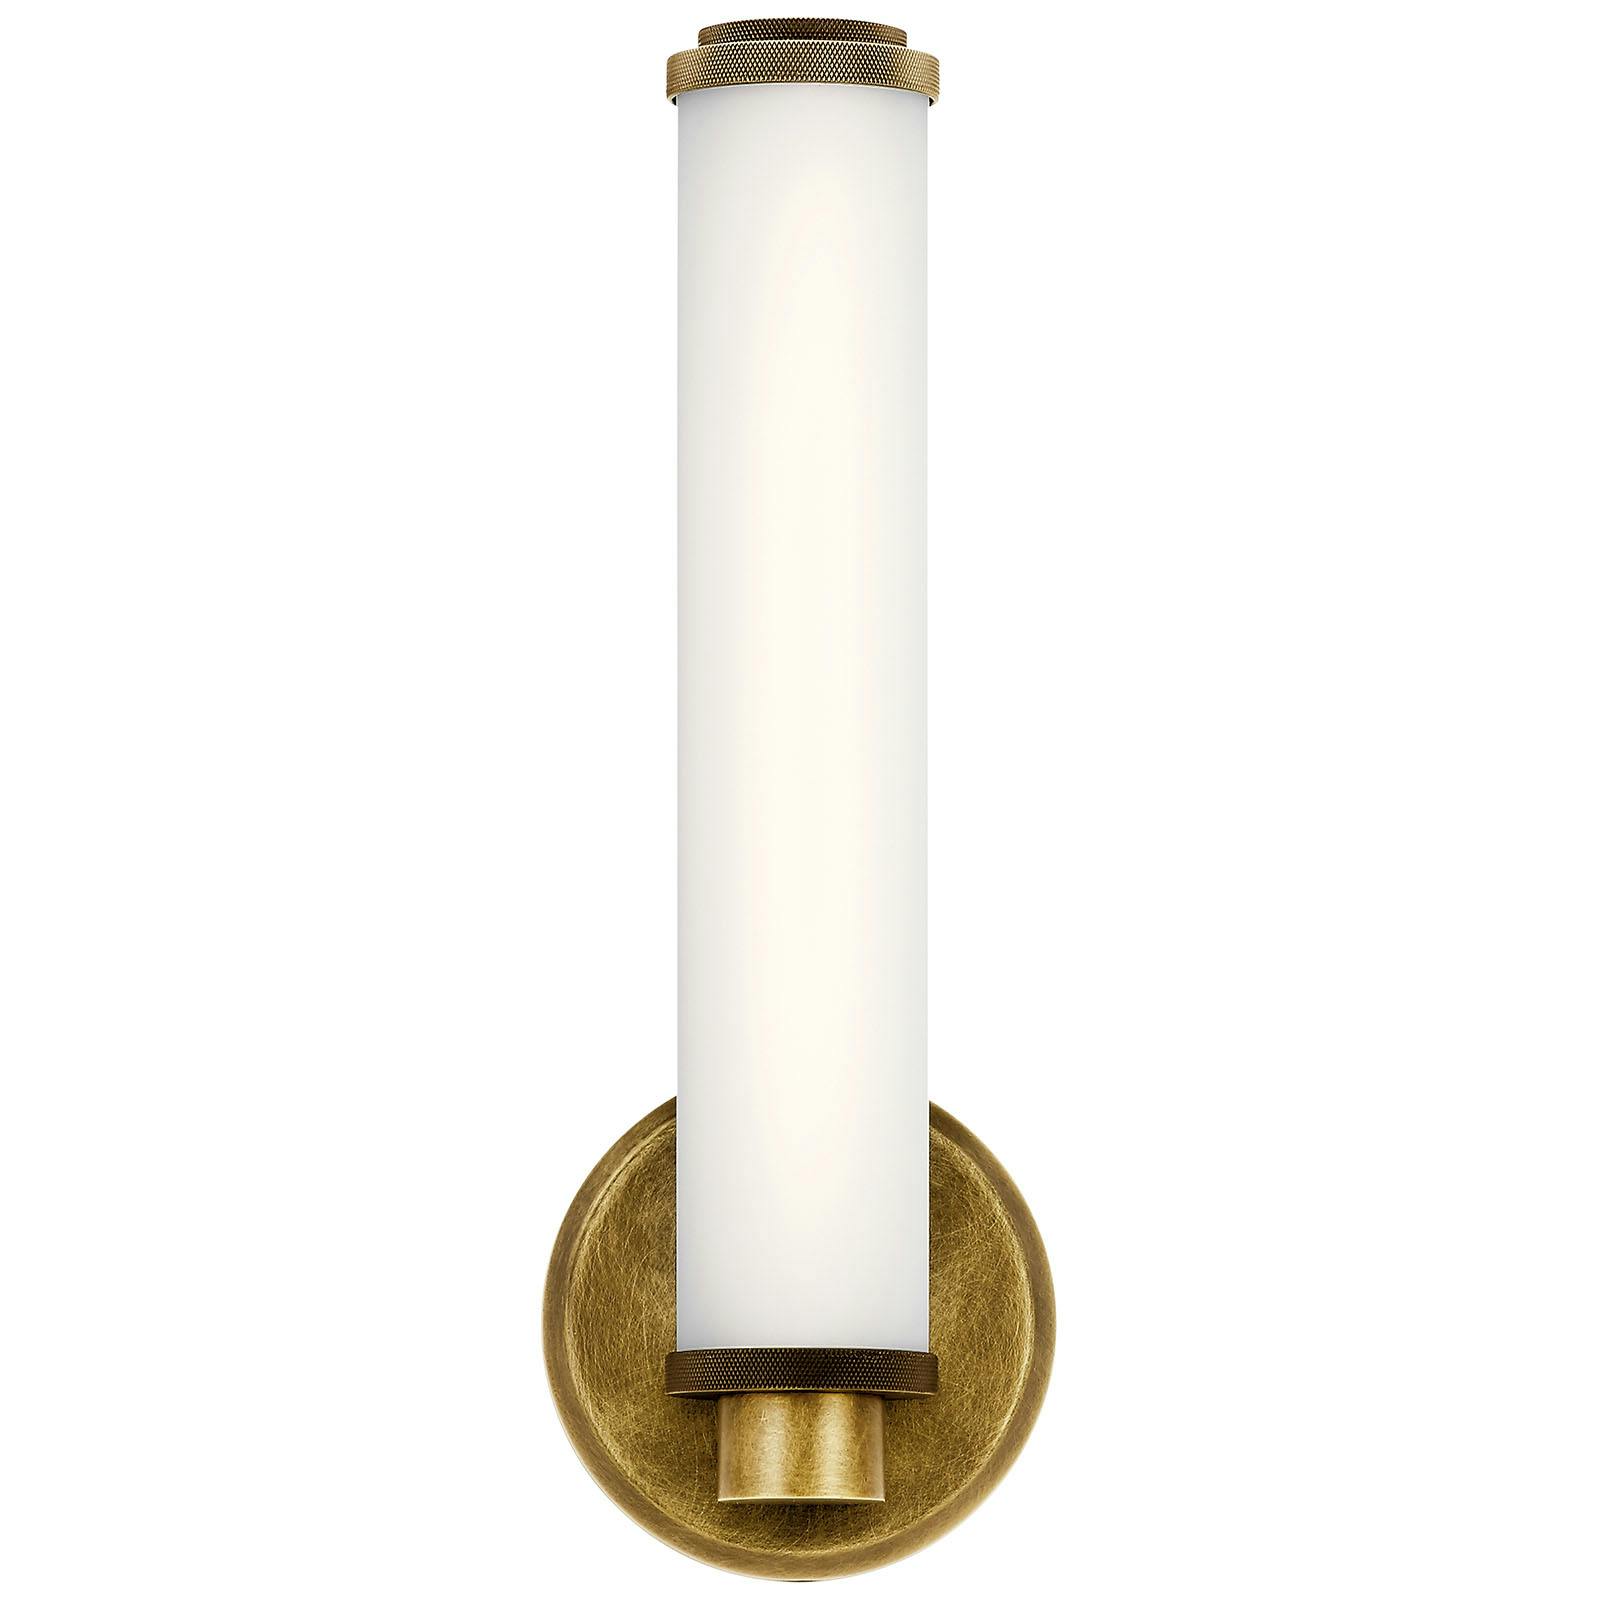 Front view of the Indeco 14.5" Linear Vanity Light Brass on a white background